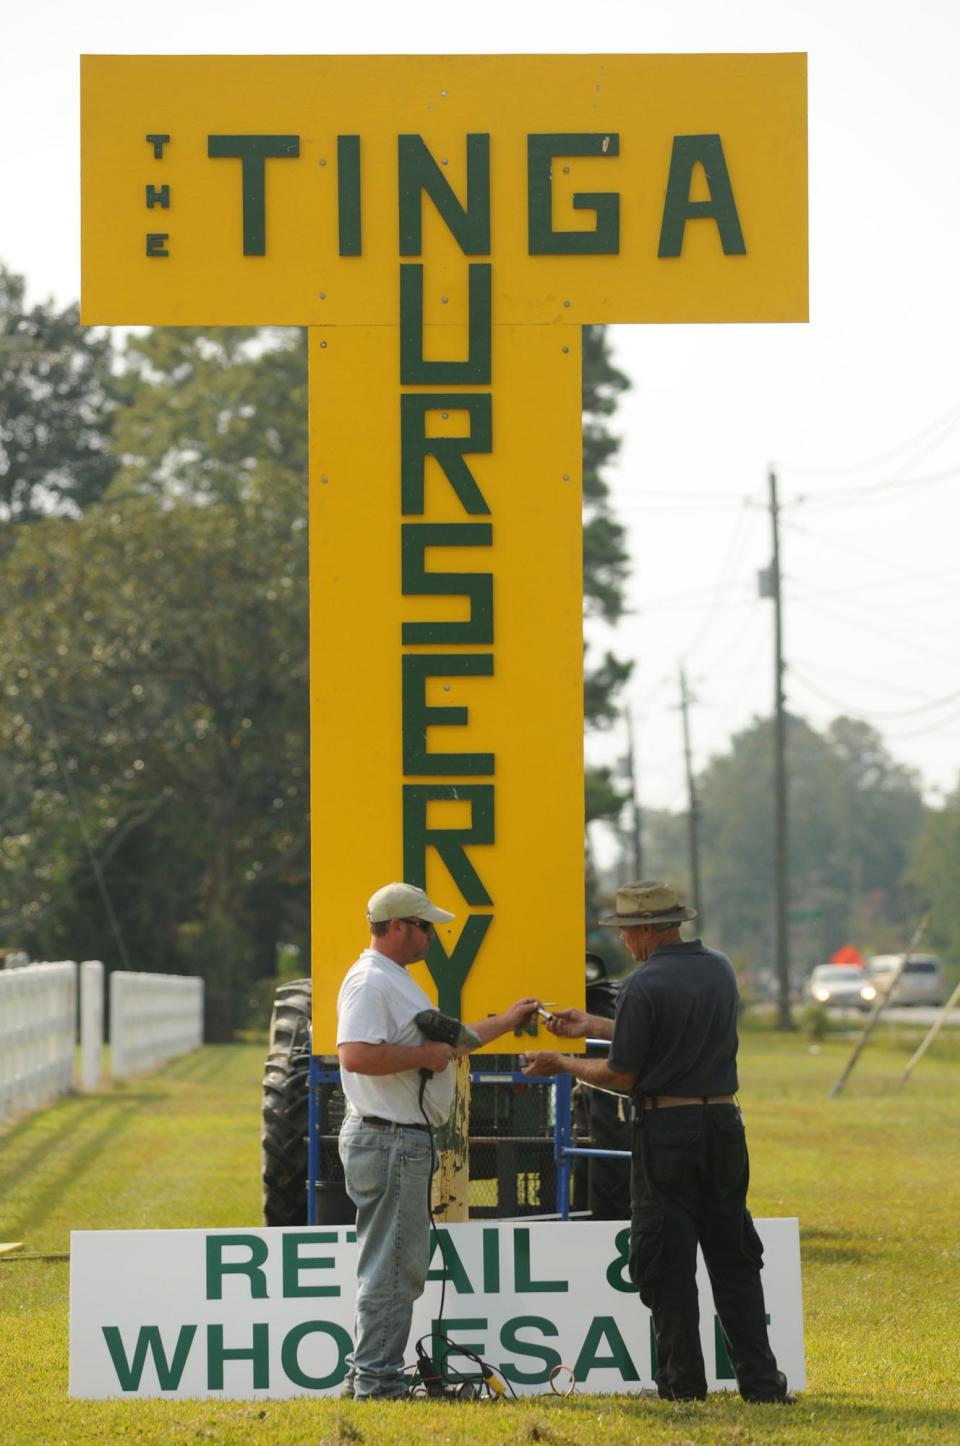 Eelco Tinga, III (left) and his father, Eelco Tinga, Jr. update their sign along Castle Hayne Road in 2010.